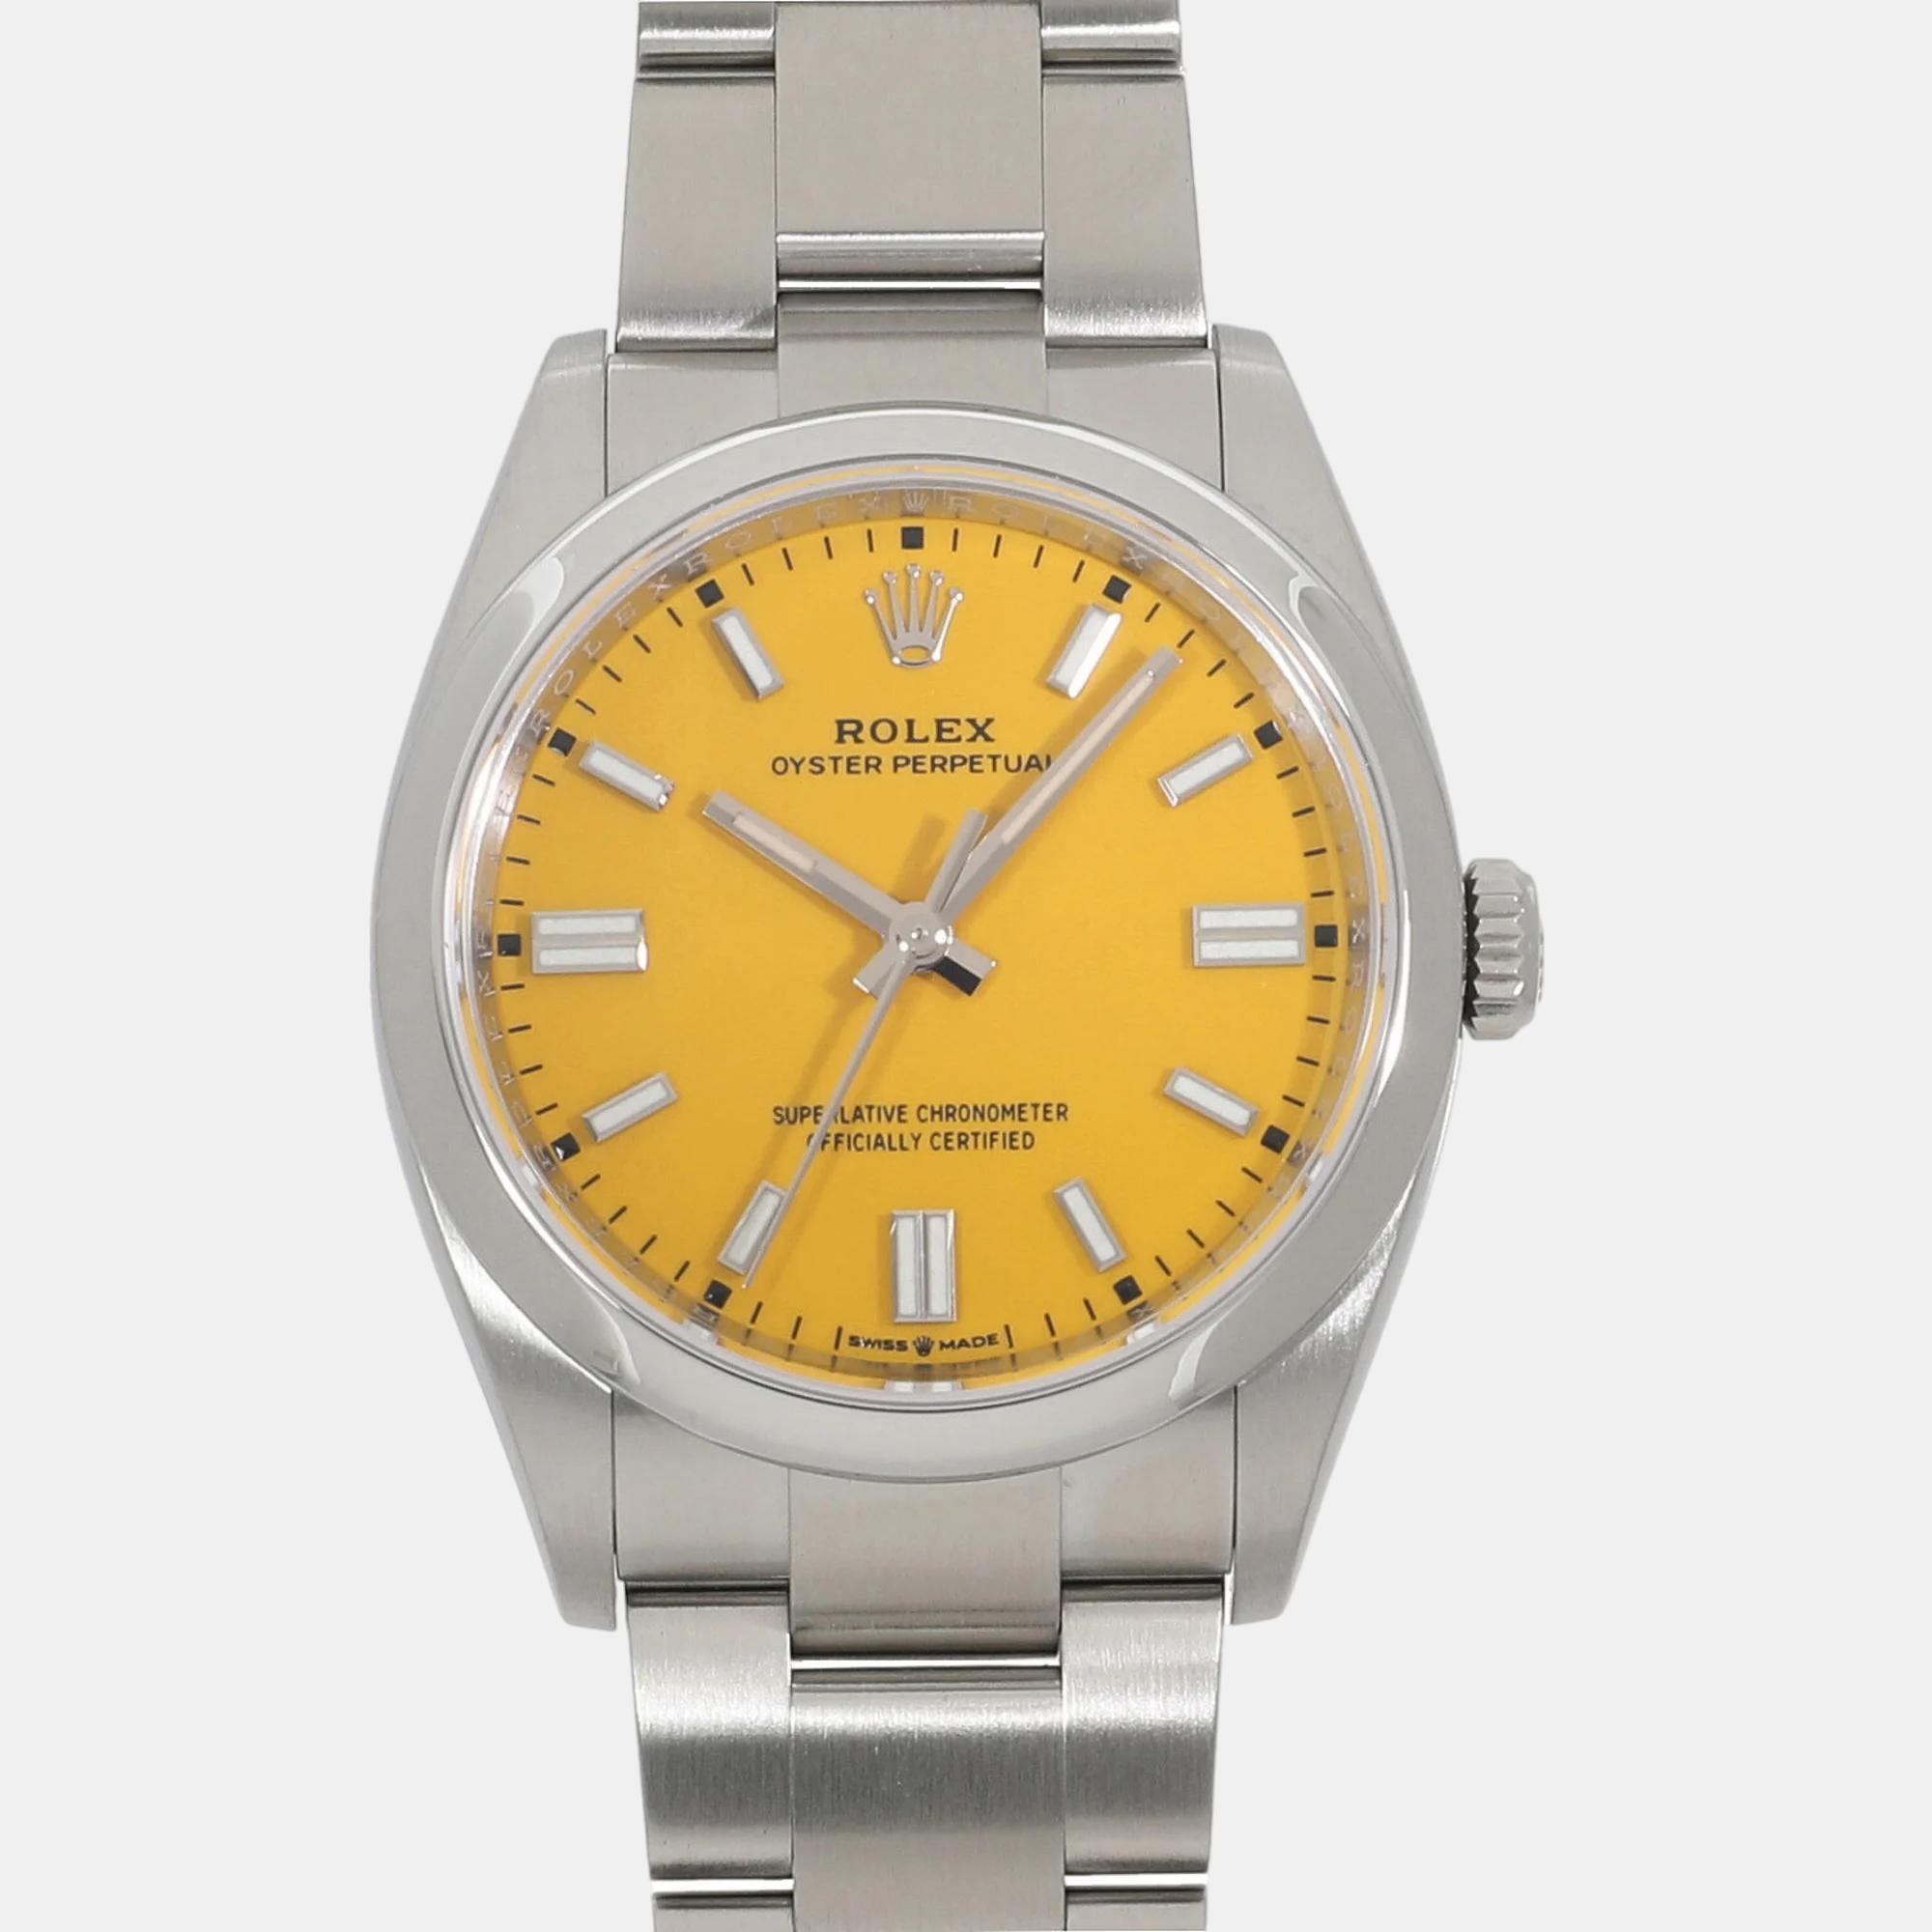 Rolex yellow stainless steel oyster perpetual 126000 automatic men's wristwatch 36 mm